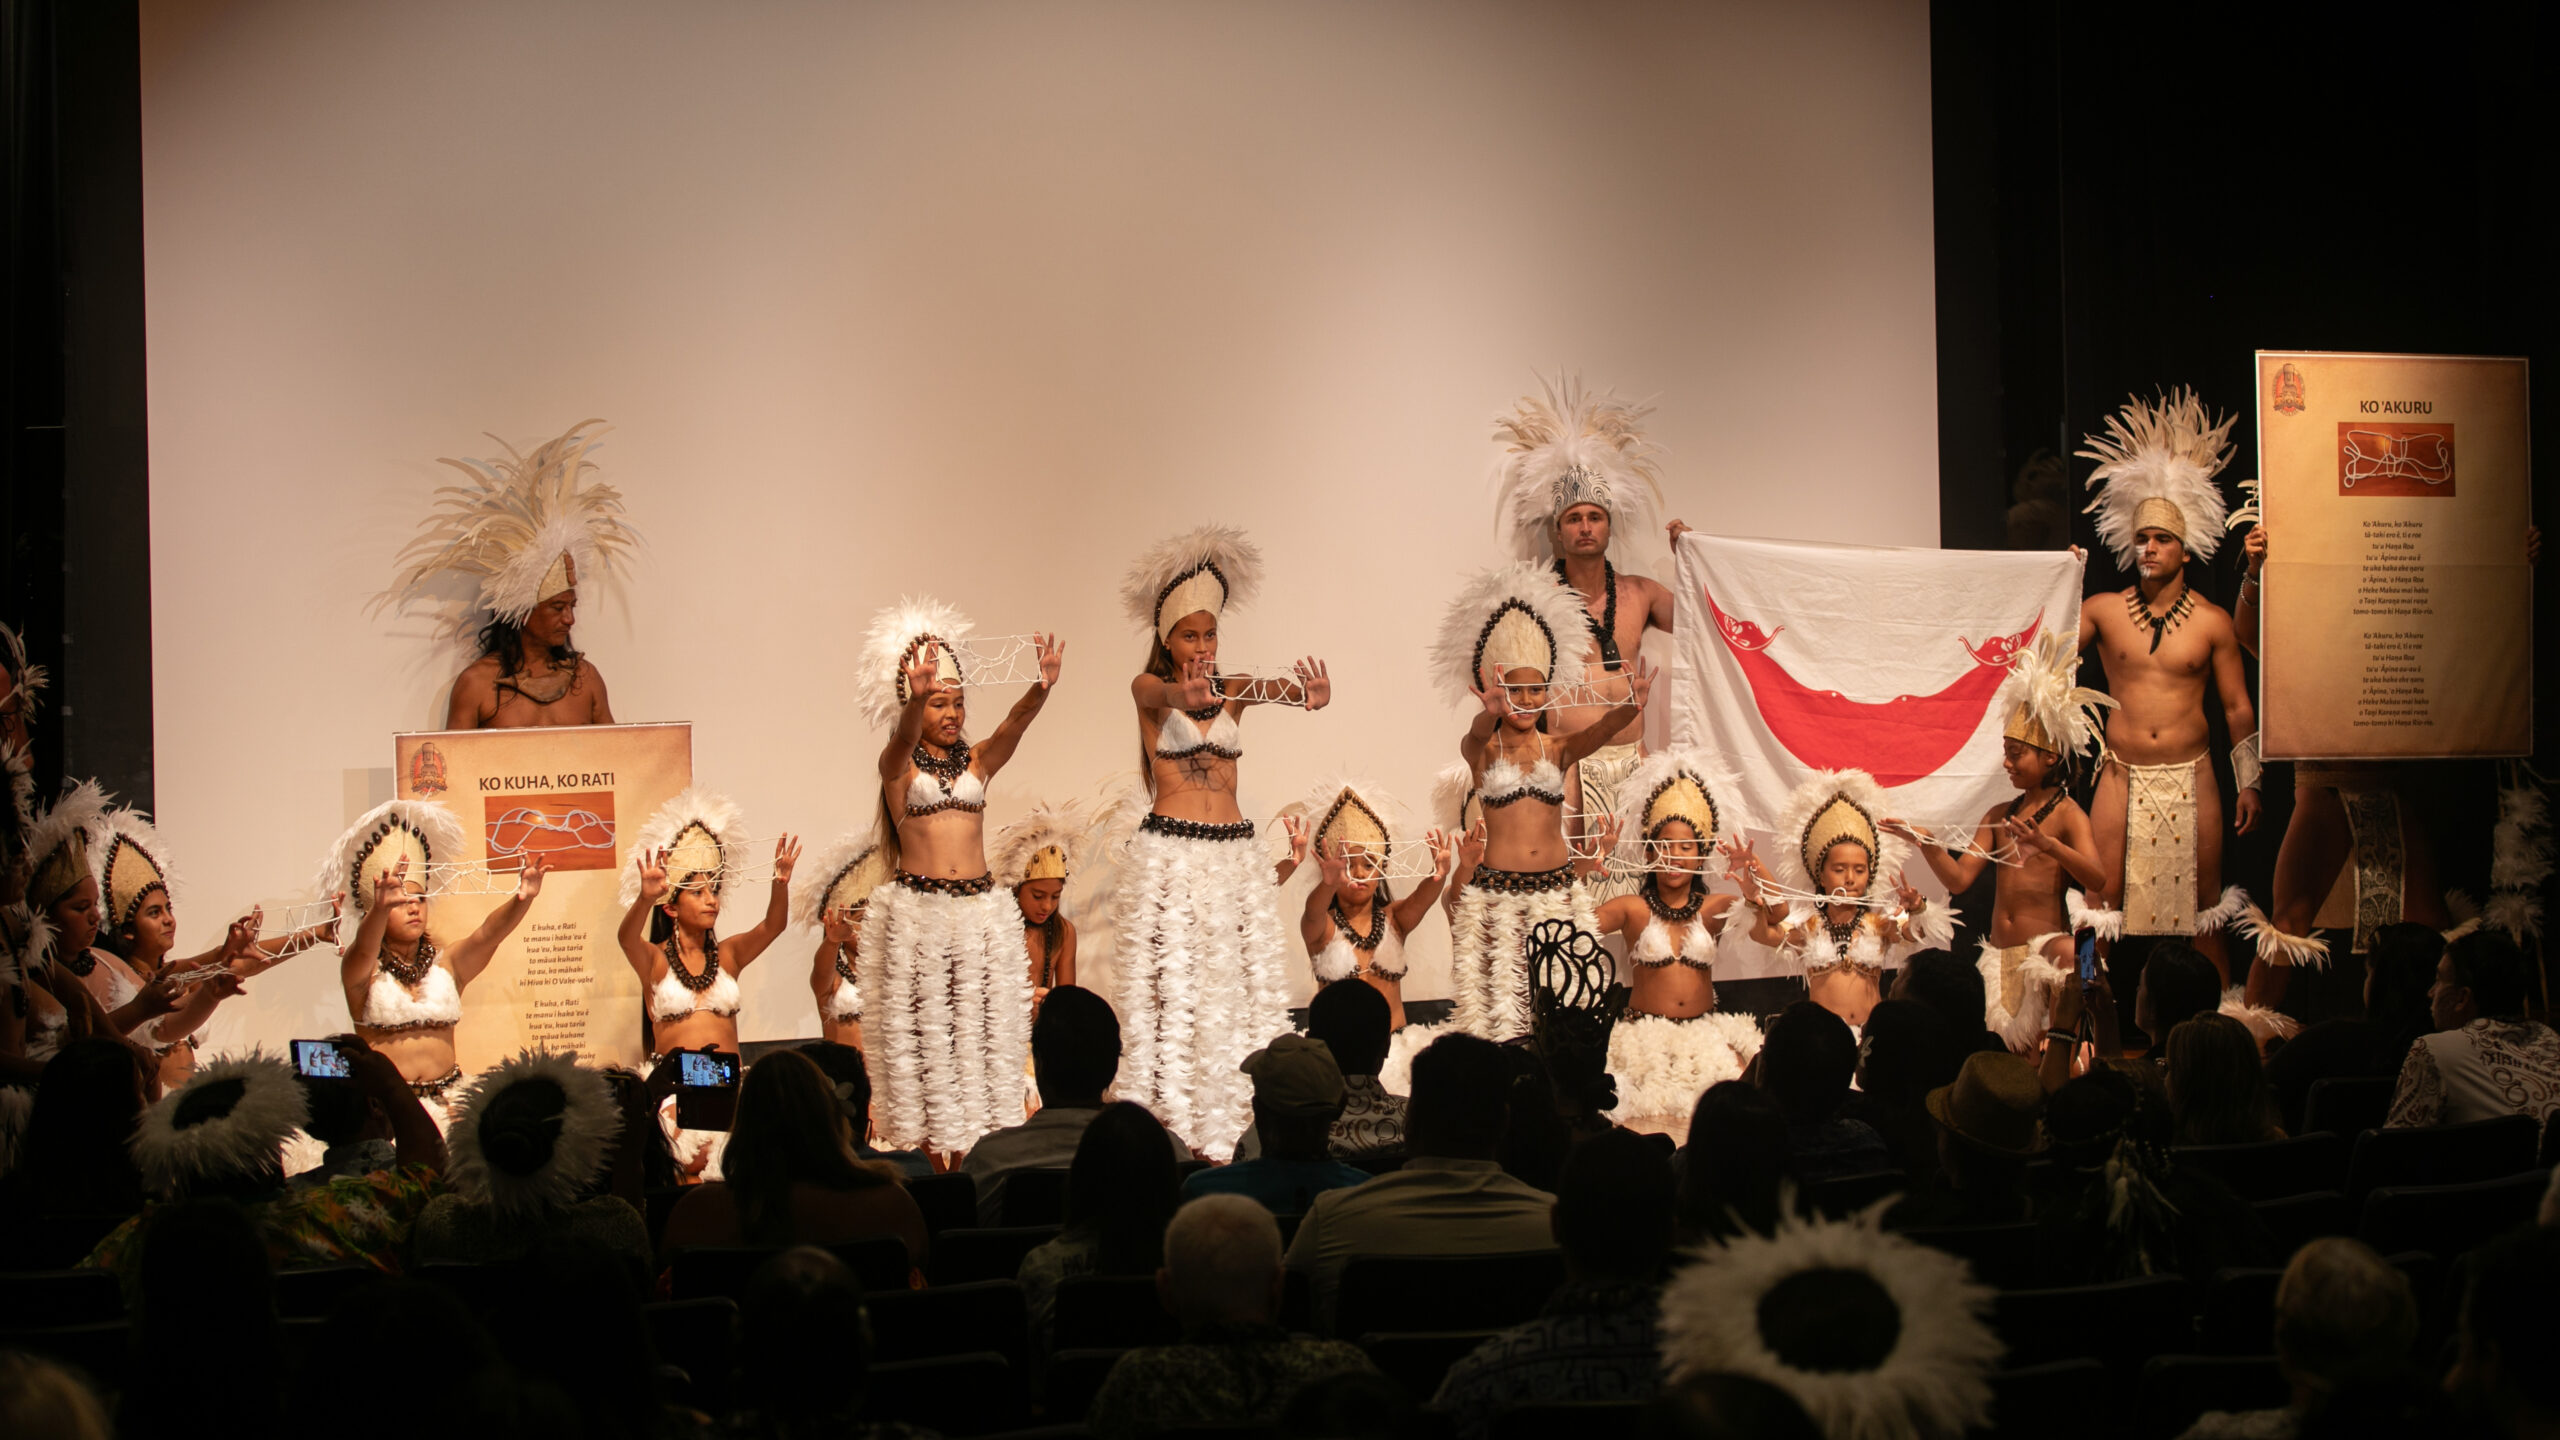 Members of the Rapa Nui community welcome attendees at the screening of their film - "Te Pito o Te Henua" or the “The Navel of the World" - during the Festival of Pacific Arts & Culture in June. Photo by Dan Lin, Nia Tero